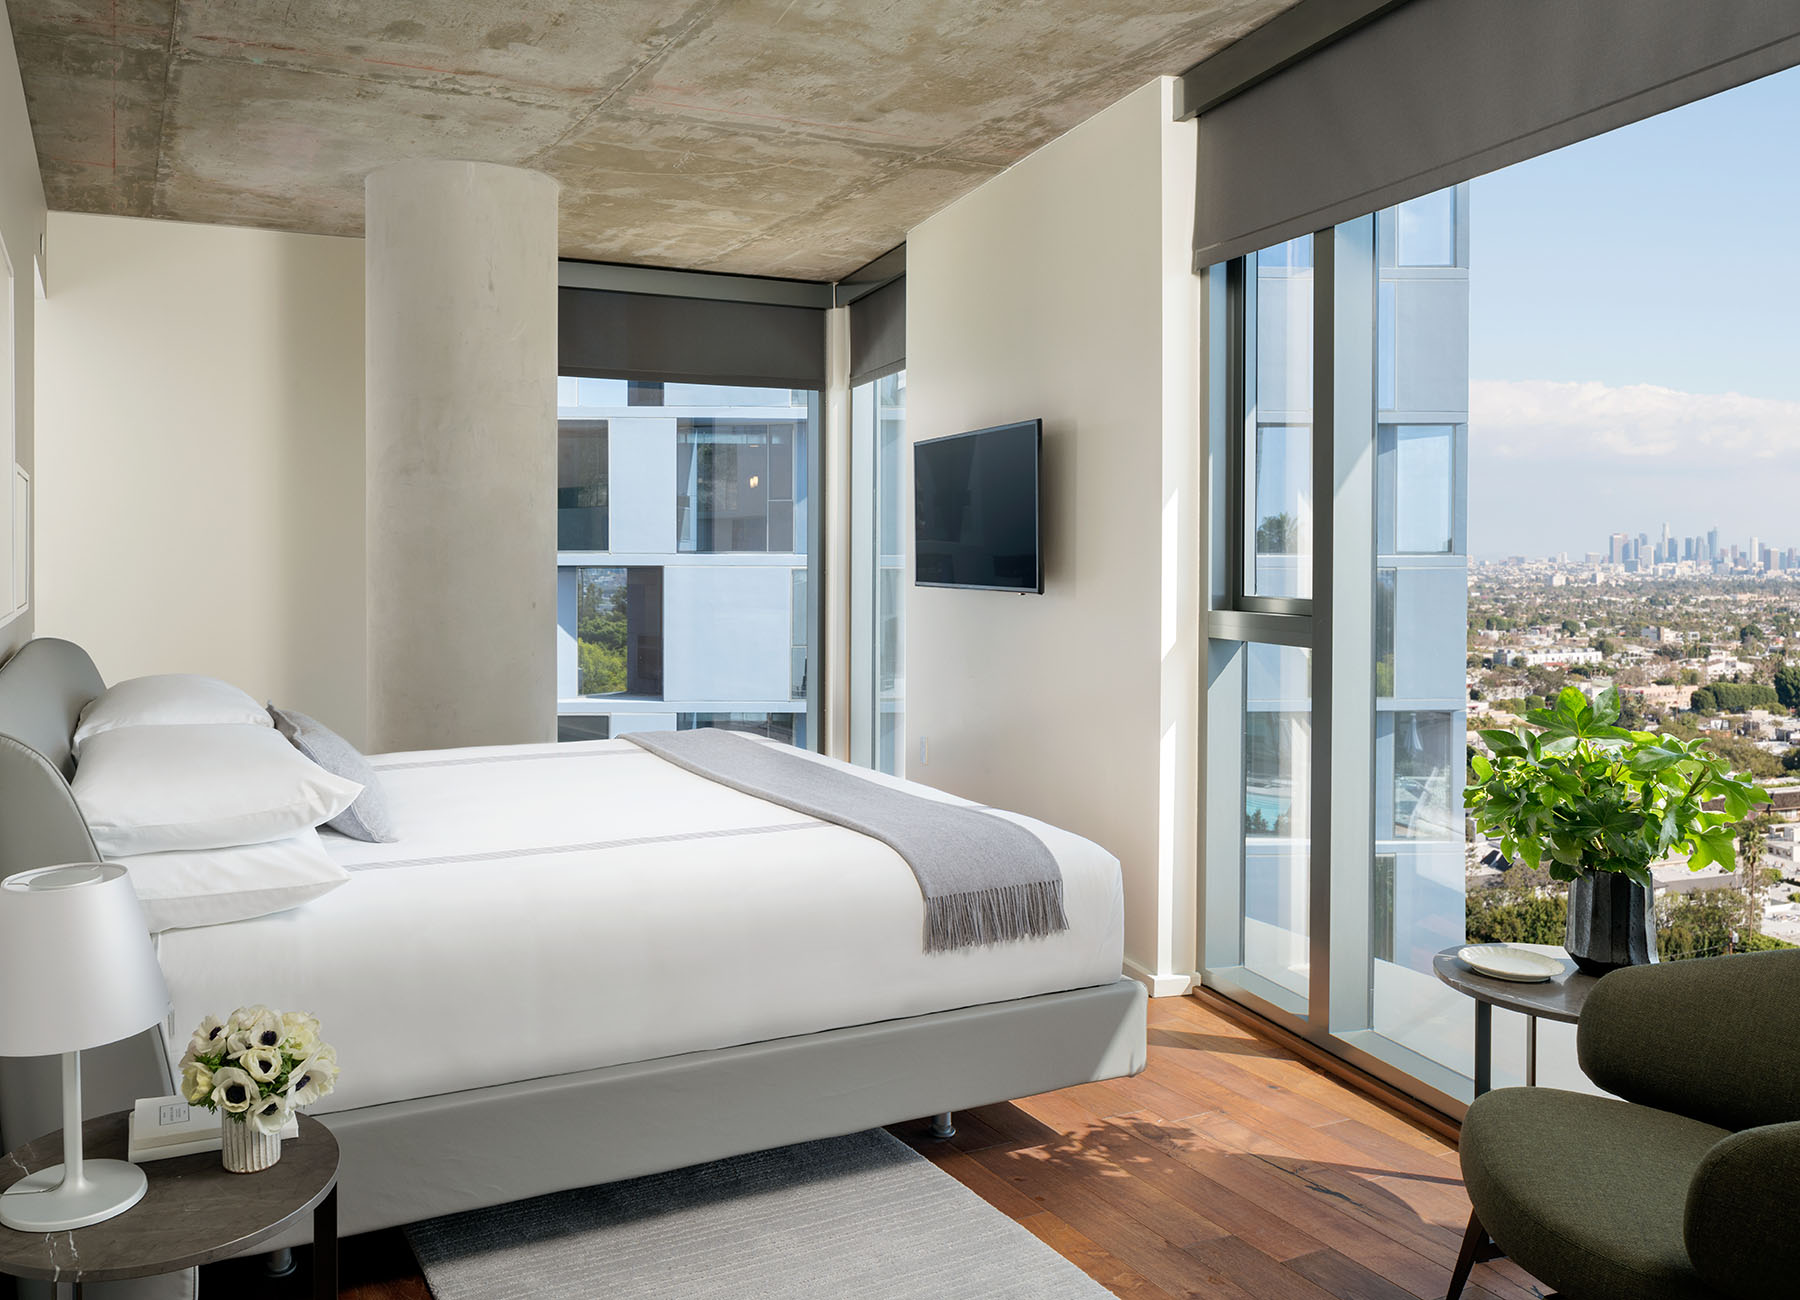 AKA West Hollywood apartment bedroom with concrete ceiling and king bed with large window view of city  